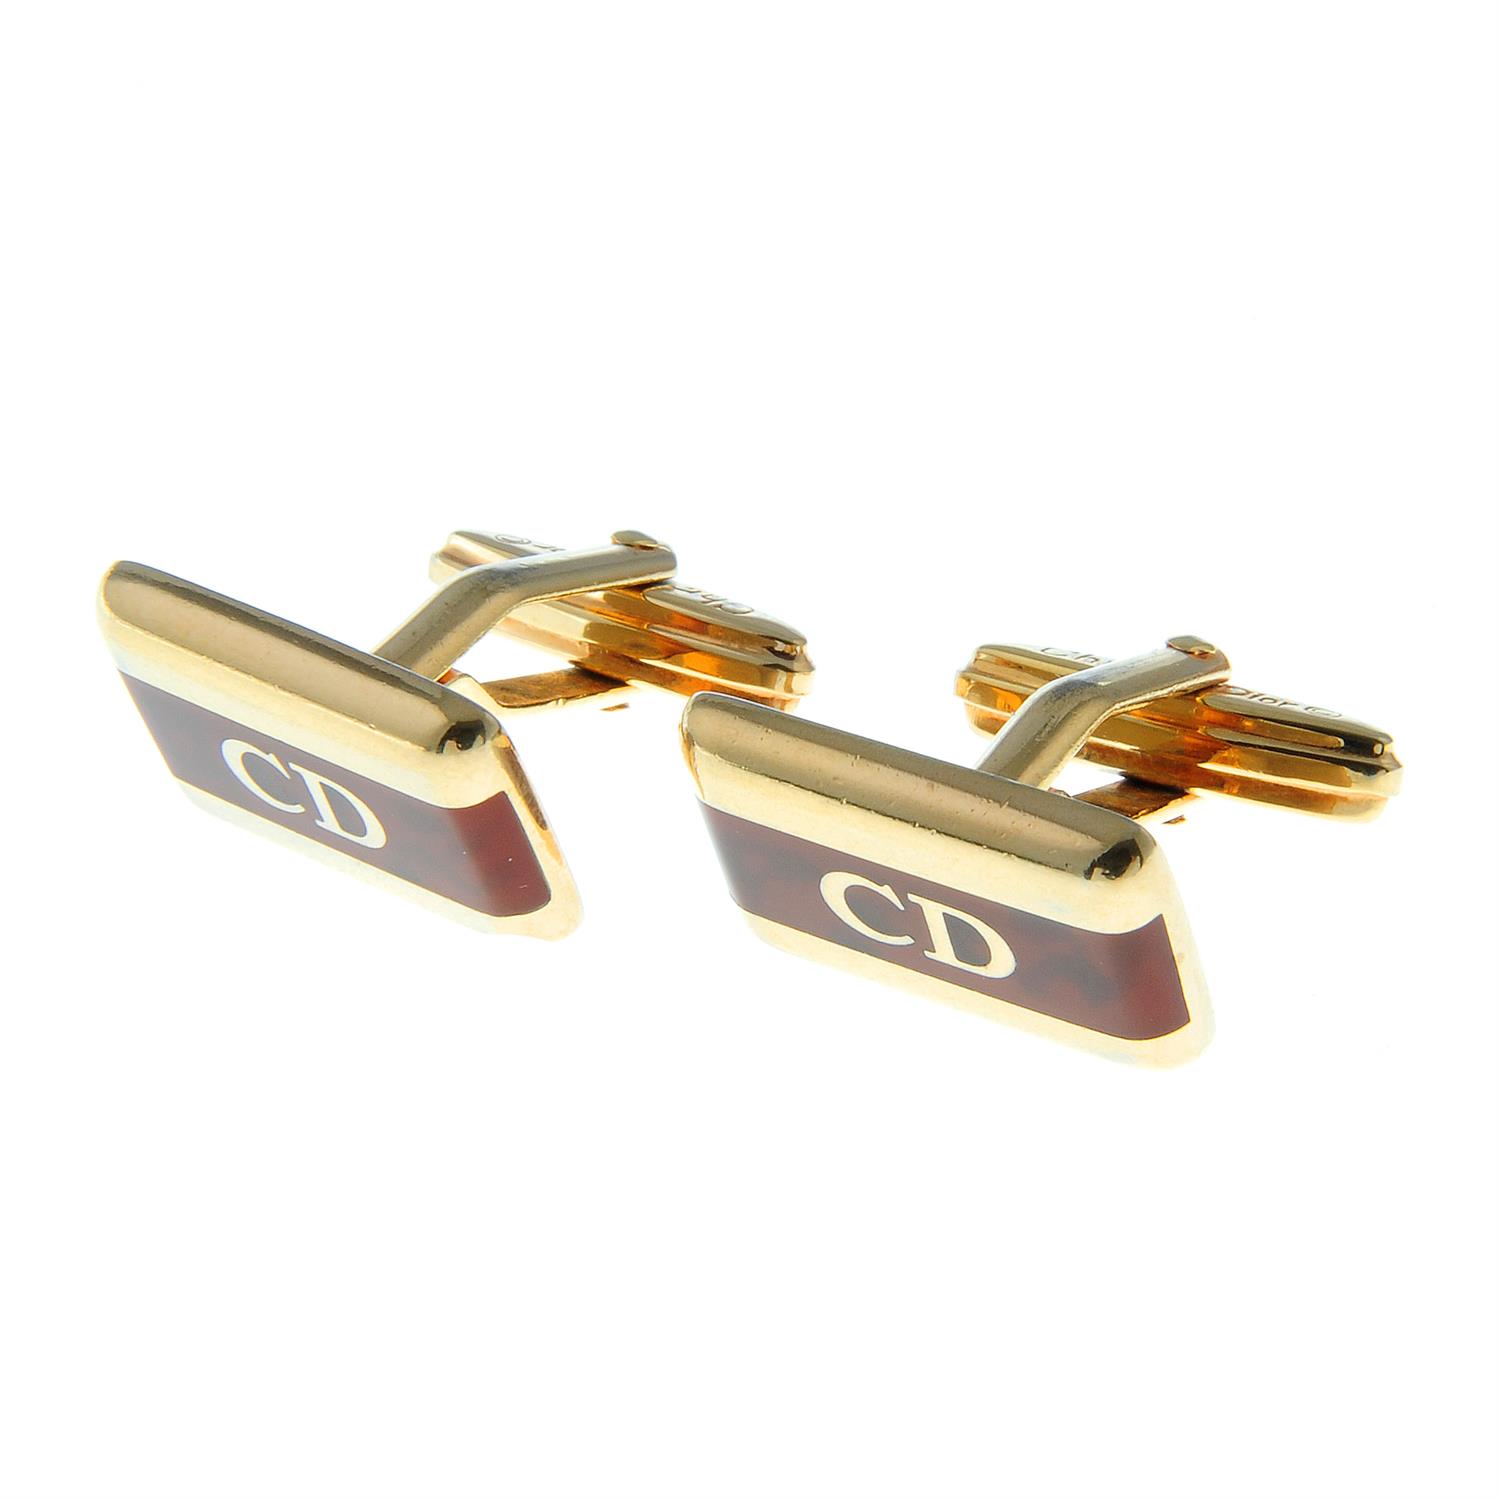 A pair of imitation tortoise shell cufflinks, by Christian Dior. - Image 3 of 3